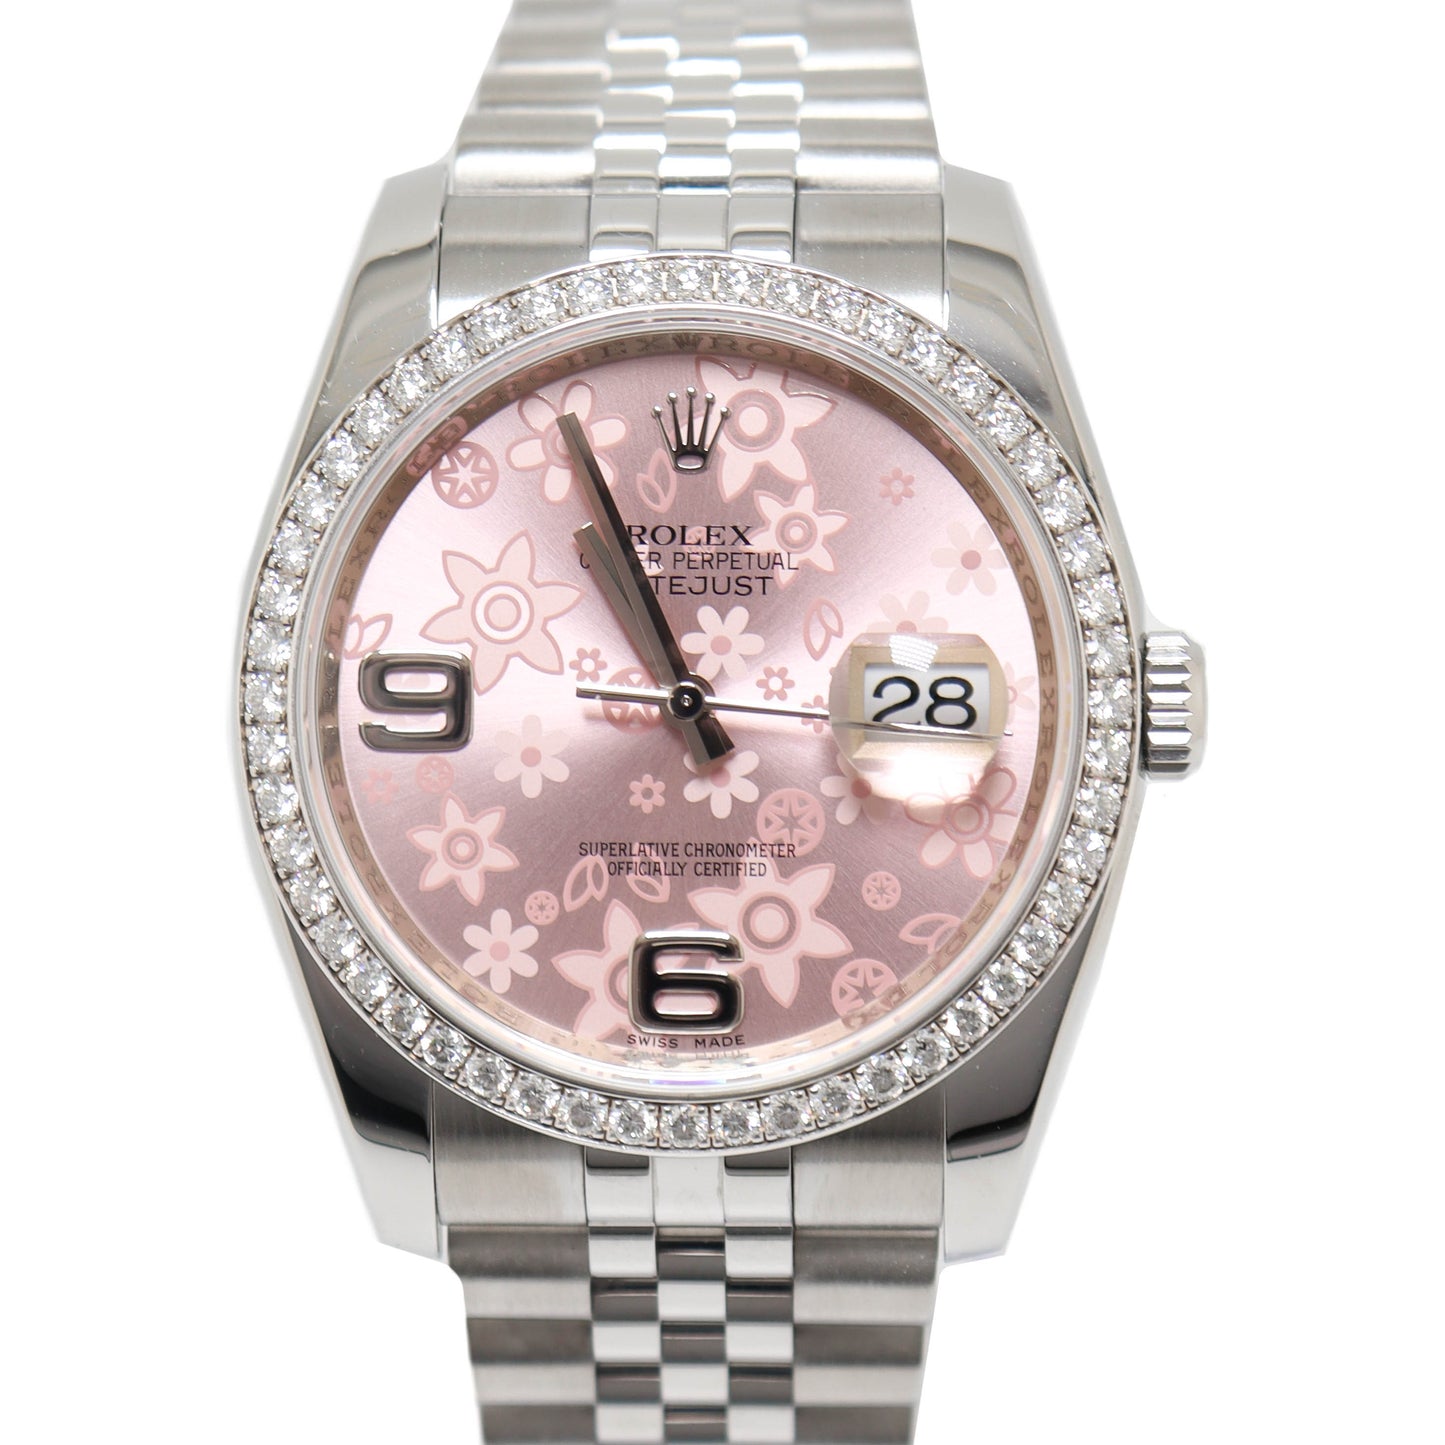 Rolex Ladies Datejust Stainless Steel Pink Floral Dial Watch Reference# 116244 - Happy Jewelers Fine Jewelry Lifetime Warranty